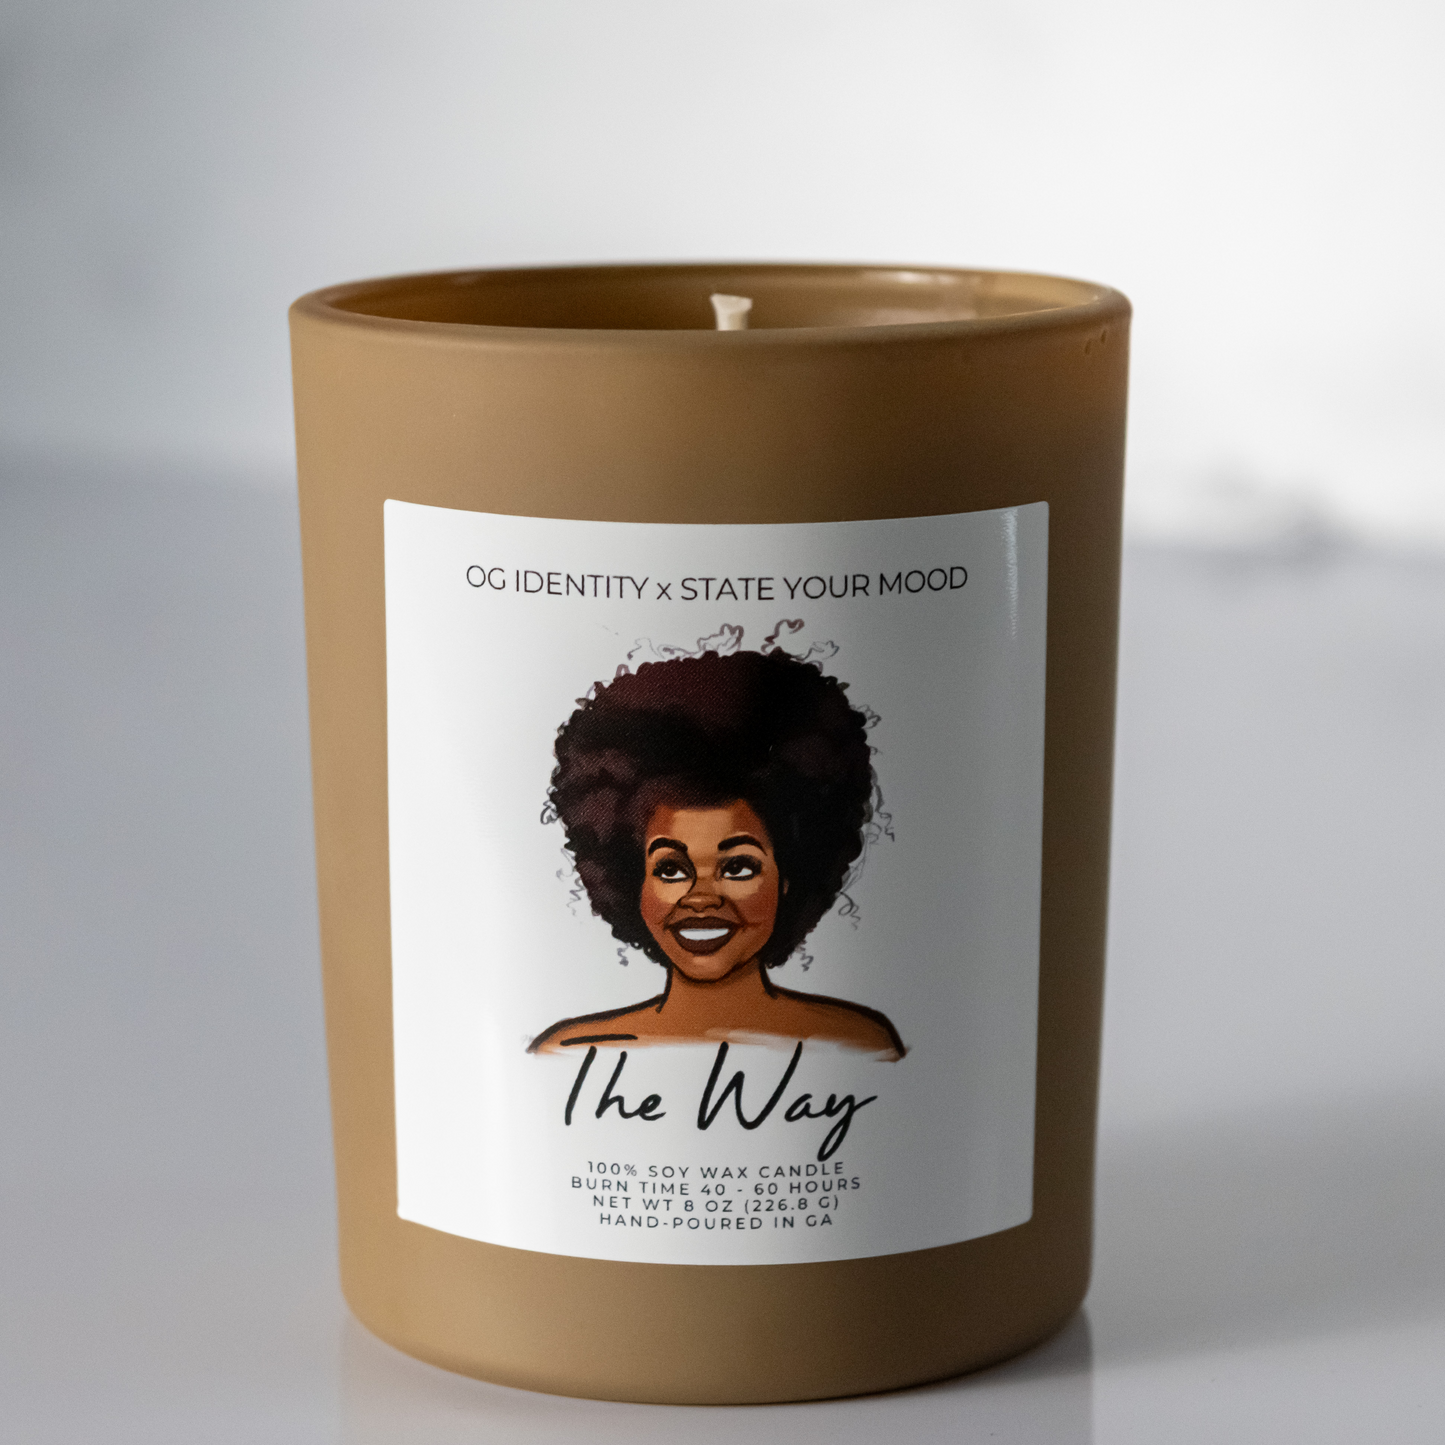 The Way Soy Candle | Jill Scott Inspired | OG Identity x State Your Mood